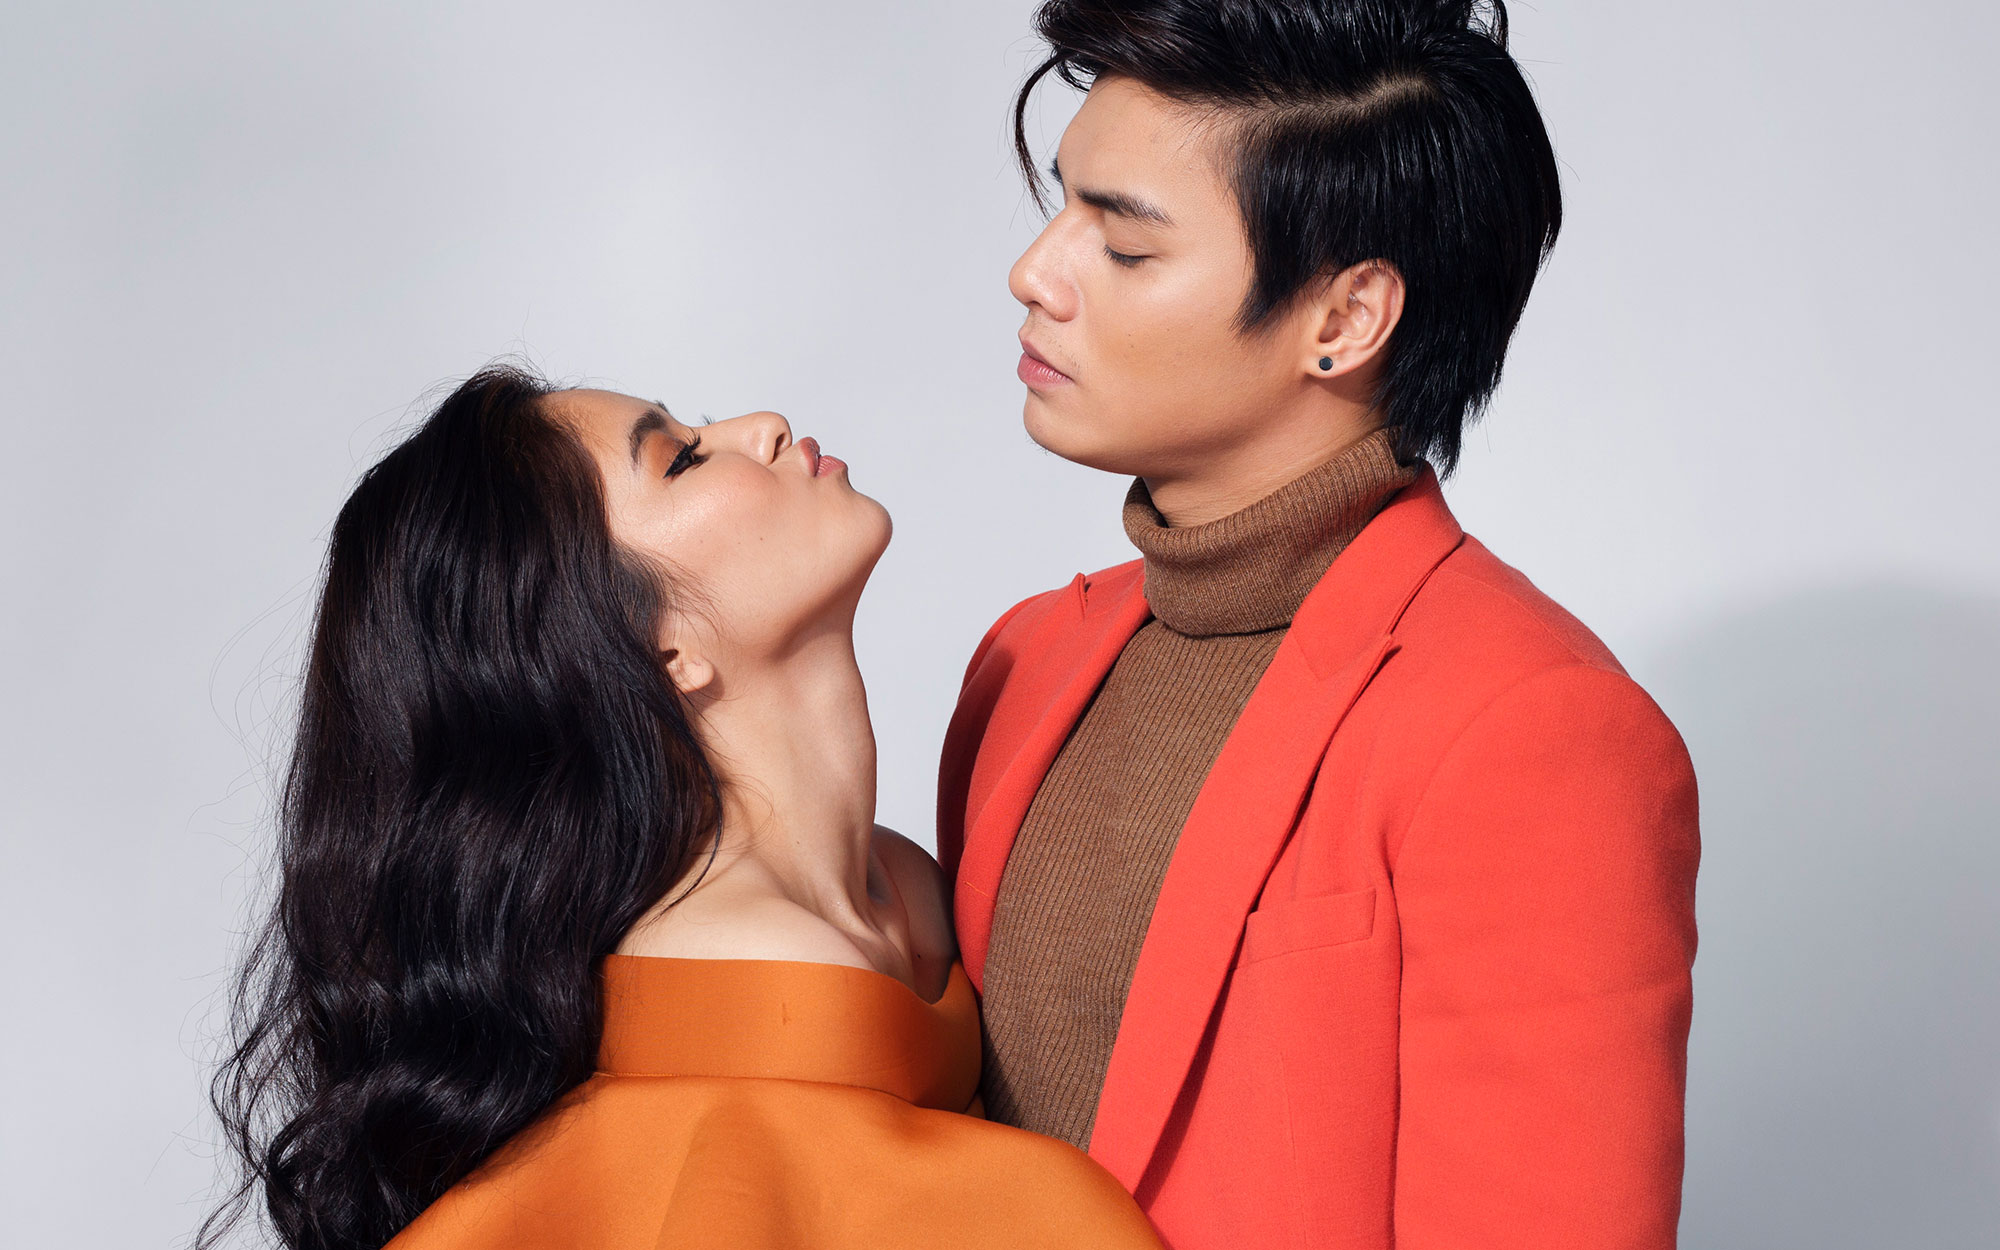 Loisa Andalio and Ronnie Alonte: A love team, in and out of showbiz ...